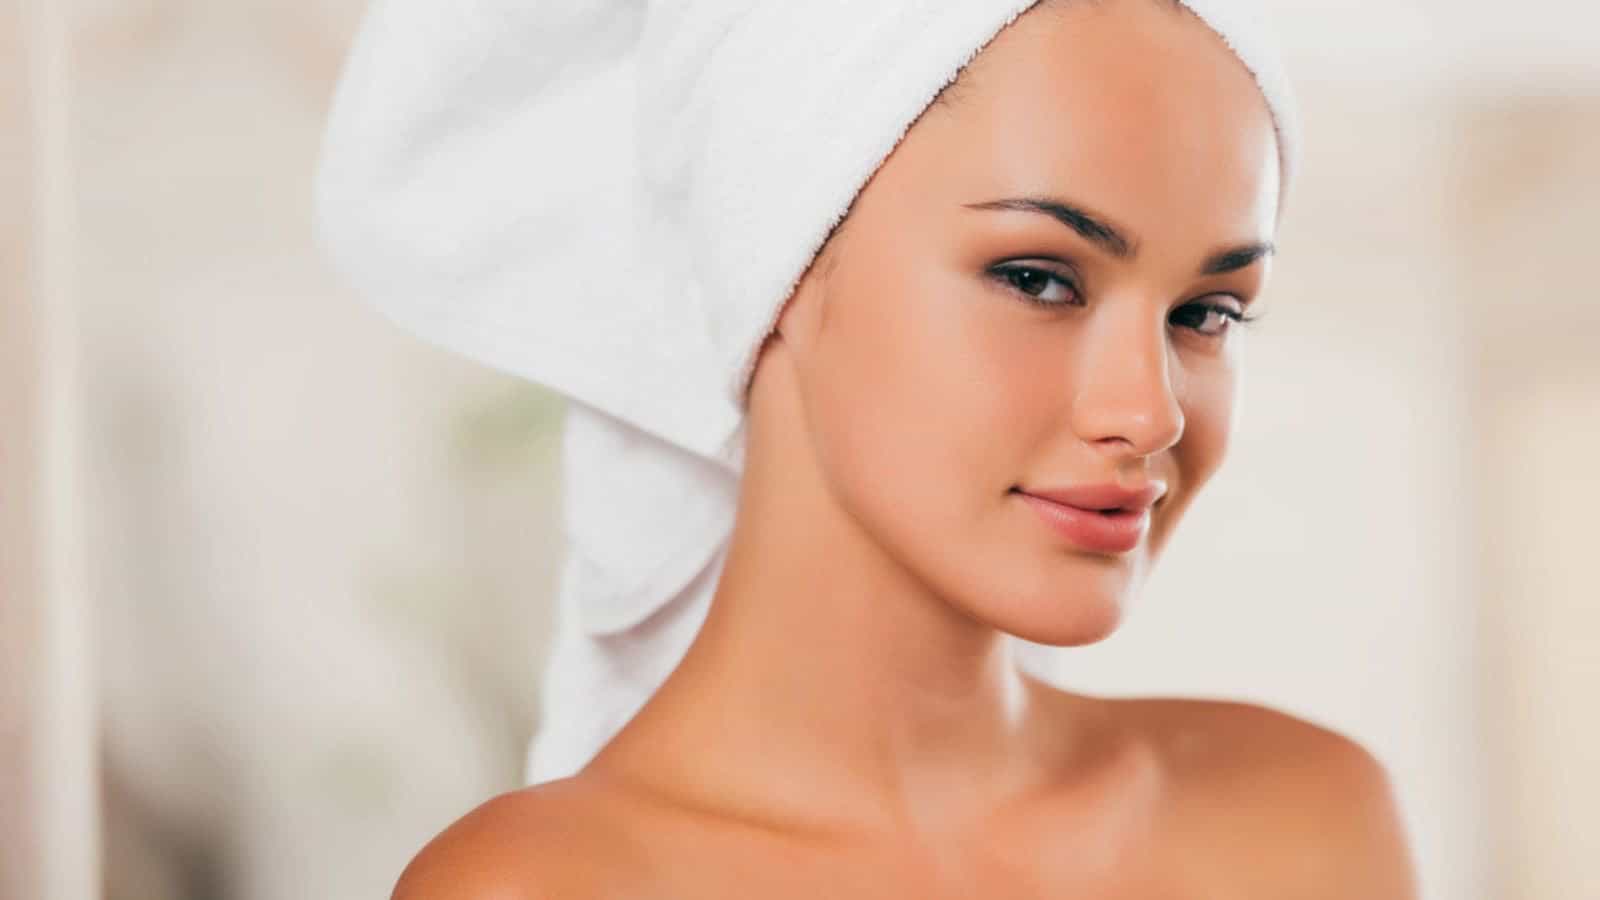 Smiling woman relaxing with towel on head at spa salon